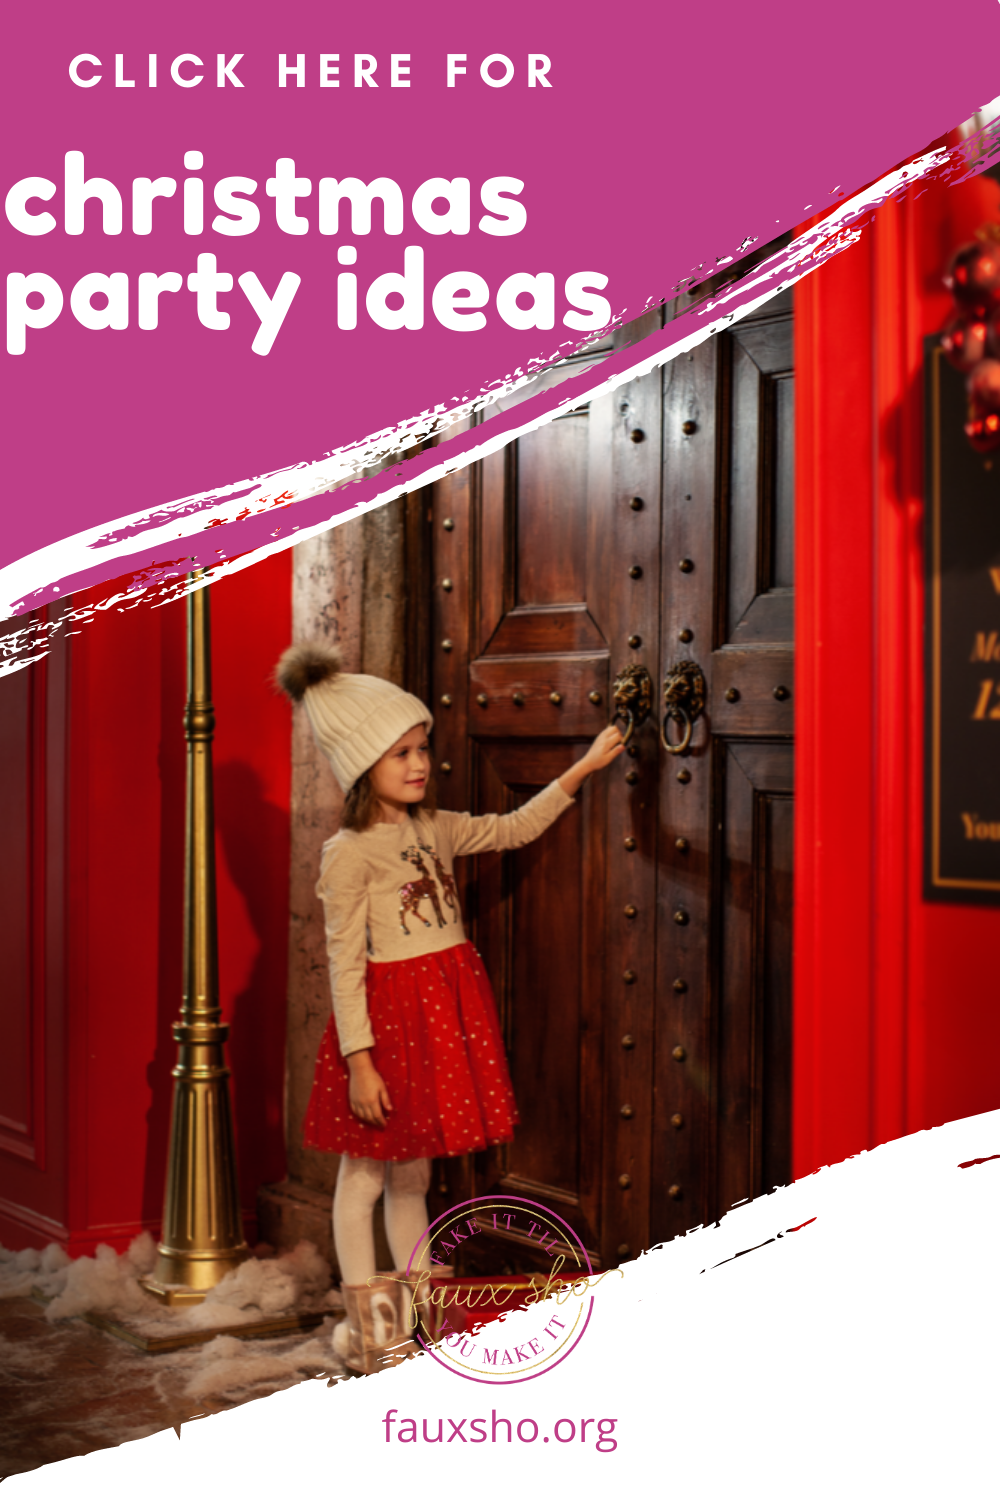 If you're planning on throwing a Christmas party for your kids, family, or co-workers, then you've got to check out these Christmas party ideas! #FauxShoBlog #ChristmasPartyIdeas #KidsChristmasPartyIdeas #FamilyChristmasPartyIdeas #WorkChristmasPartyIdeas  #christmasparty